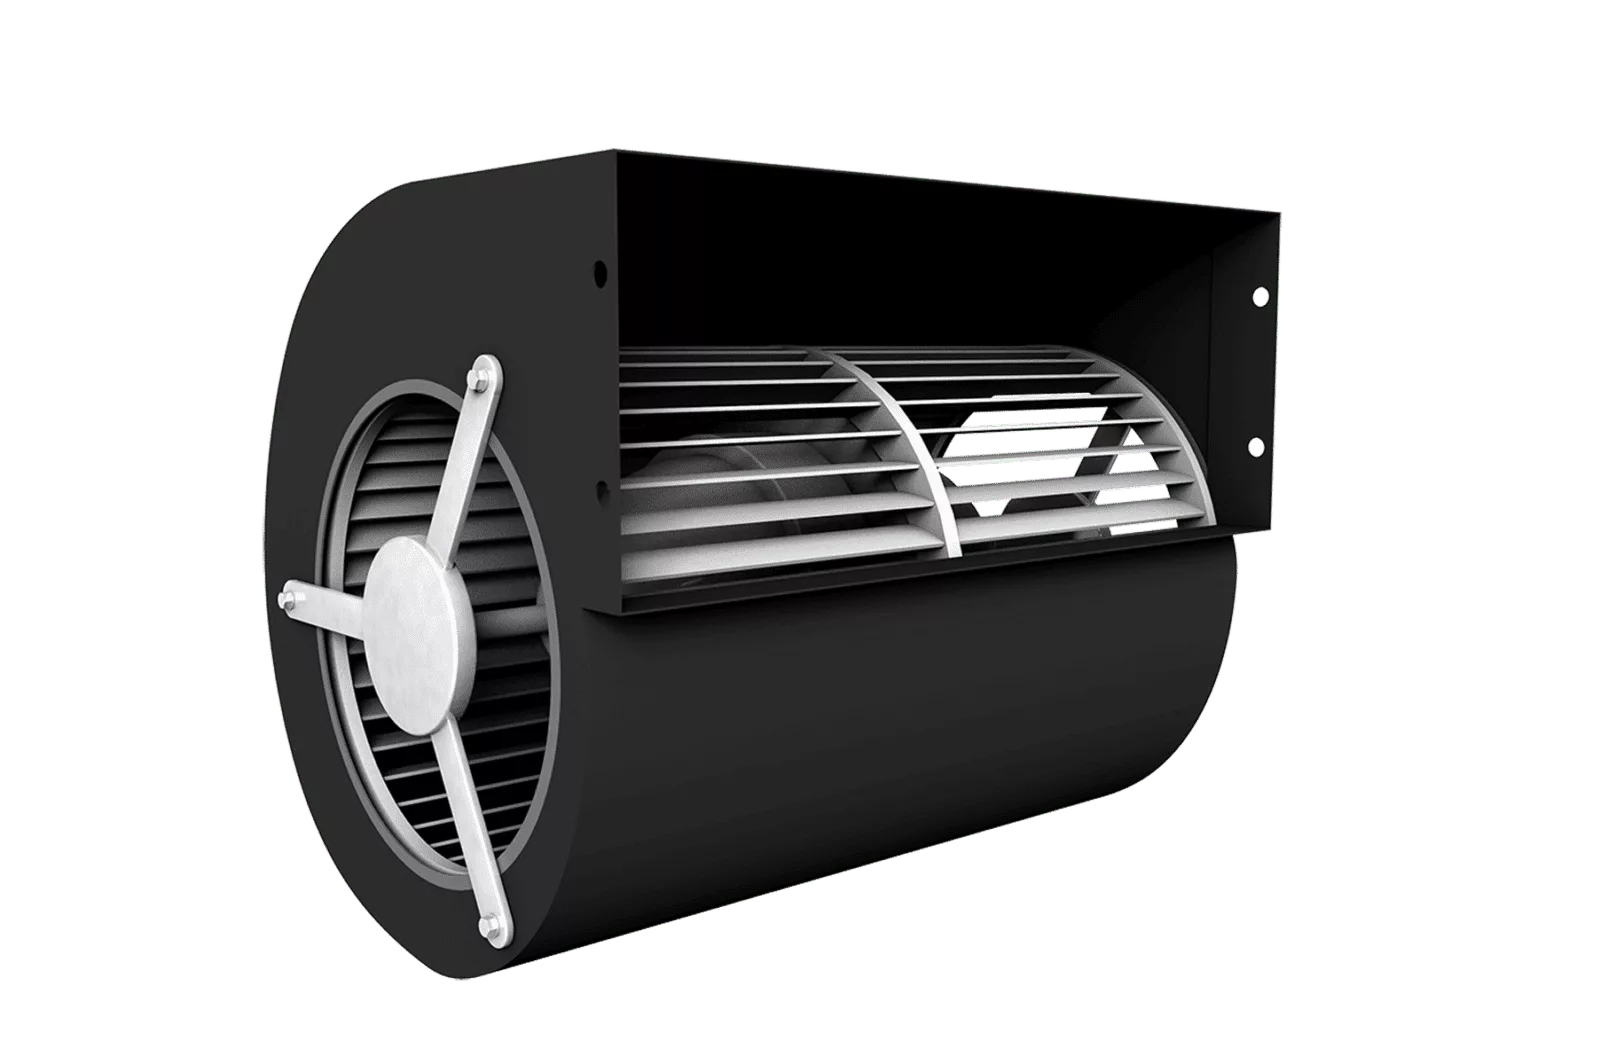 A black cylindrical ventilation fan with a metal grille cover, featuring a central motor and blade assembly inside.